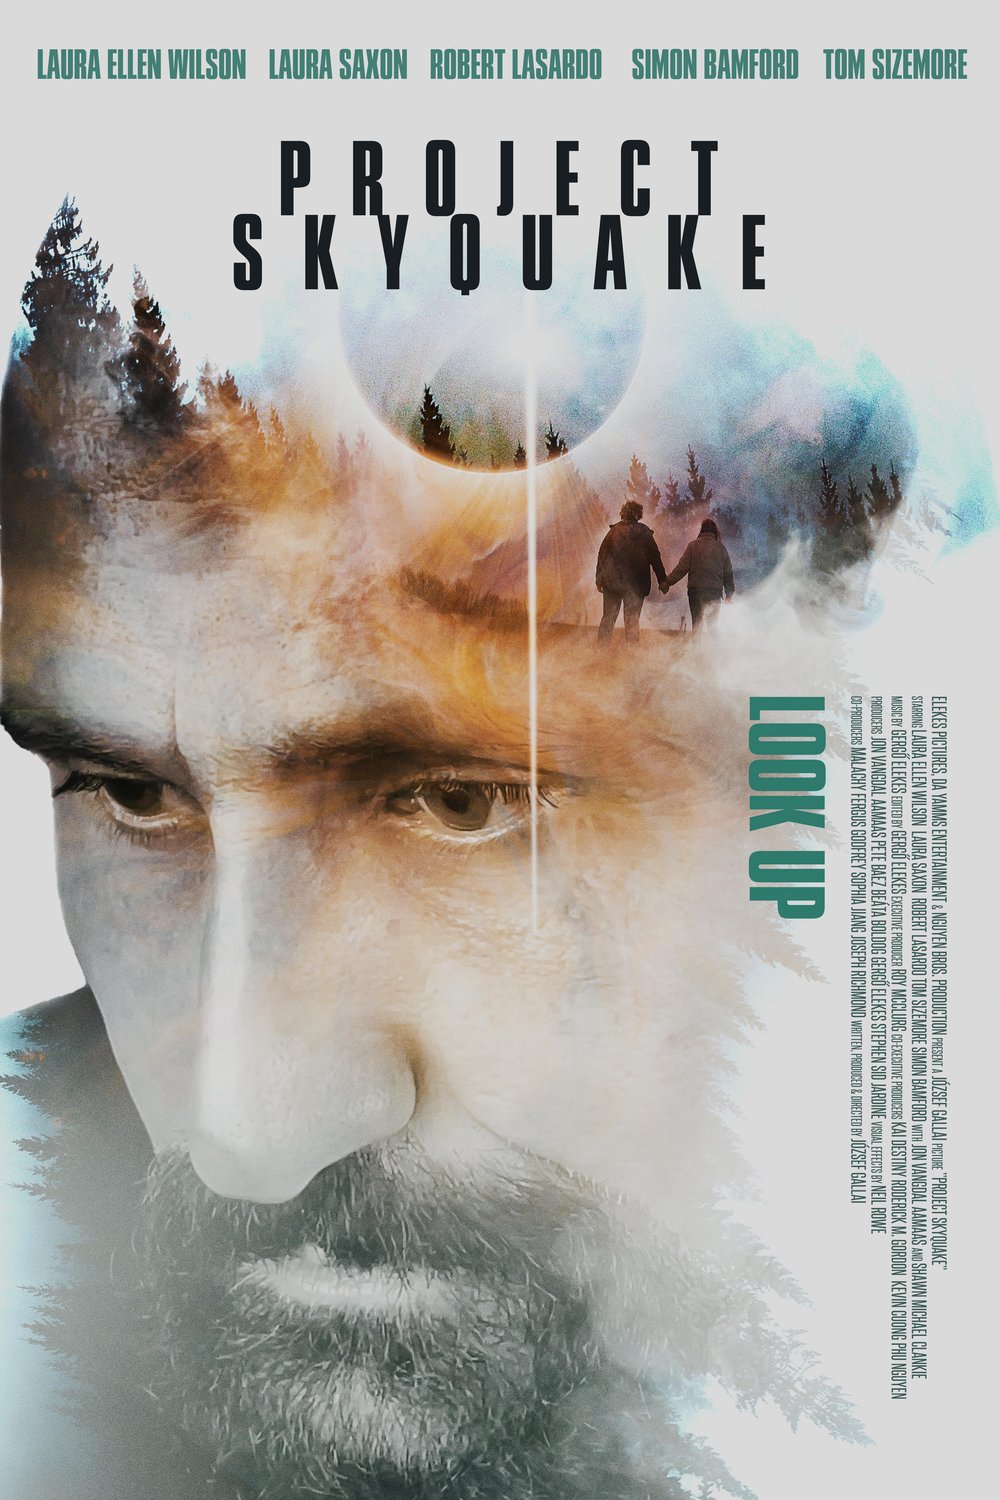 Poster of the movie Project Skyquake